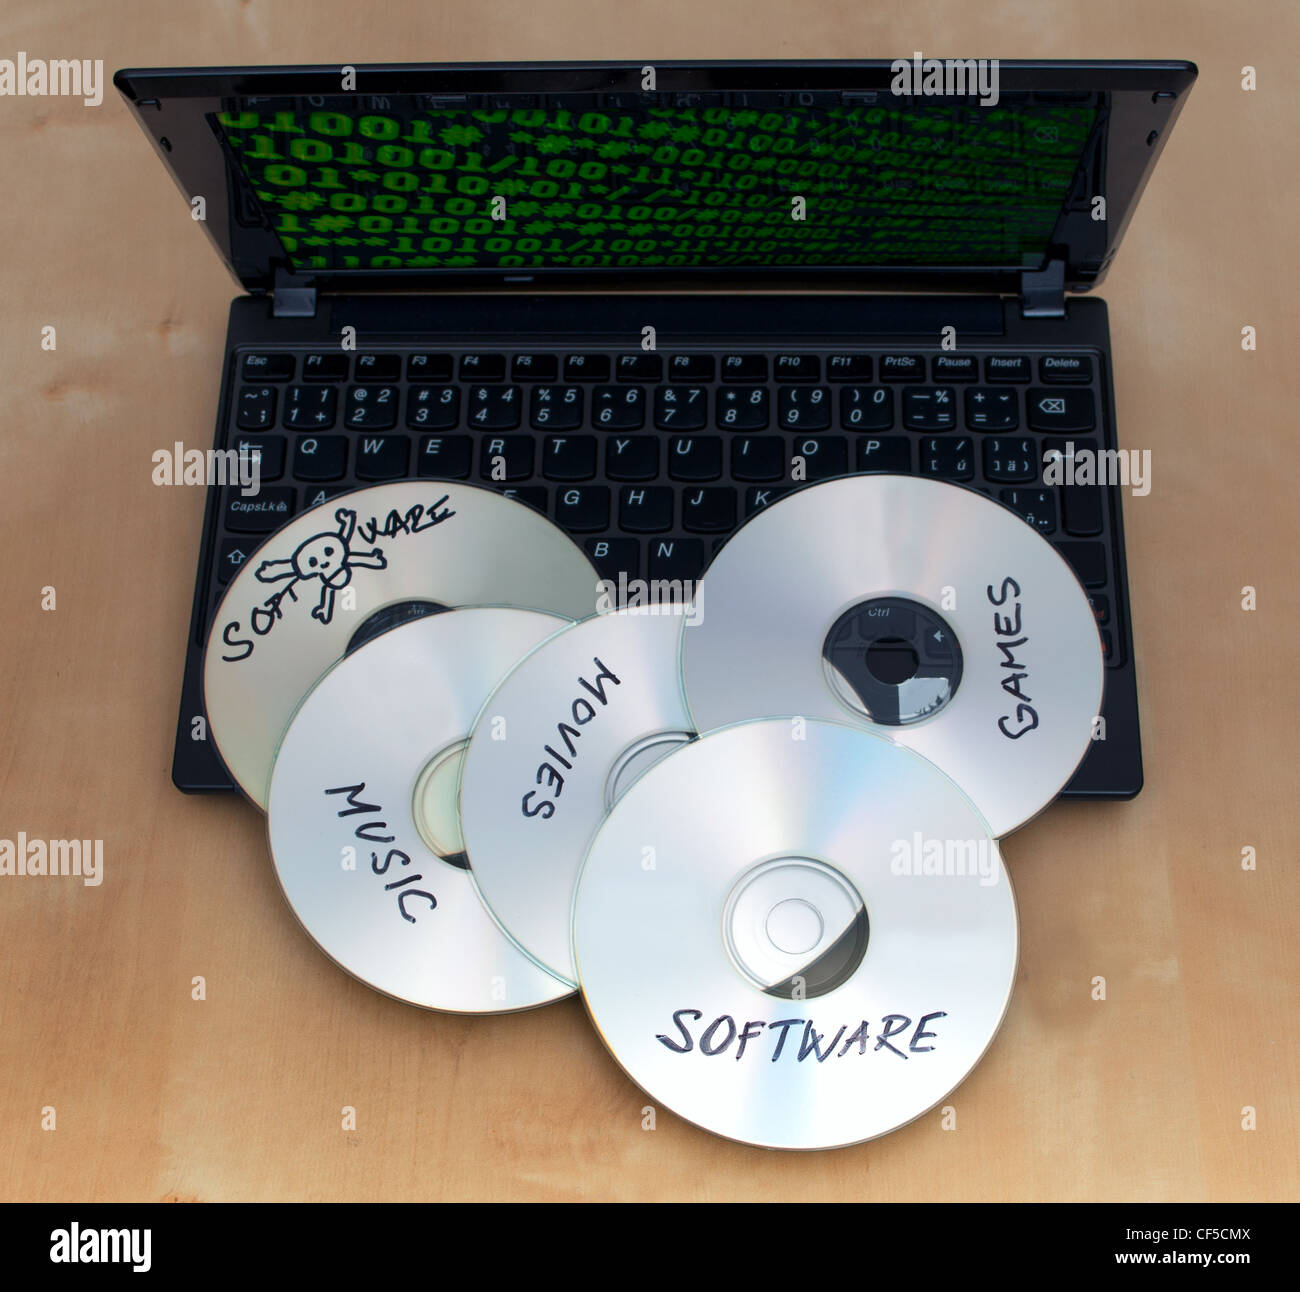 Piracy Concept - Burnt CDs With Illegal Software on Keyboard of Notebook Stock Photo